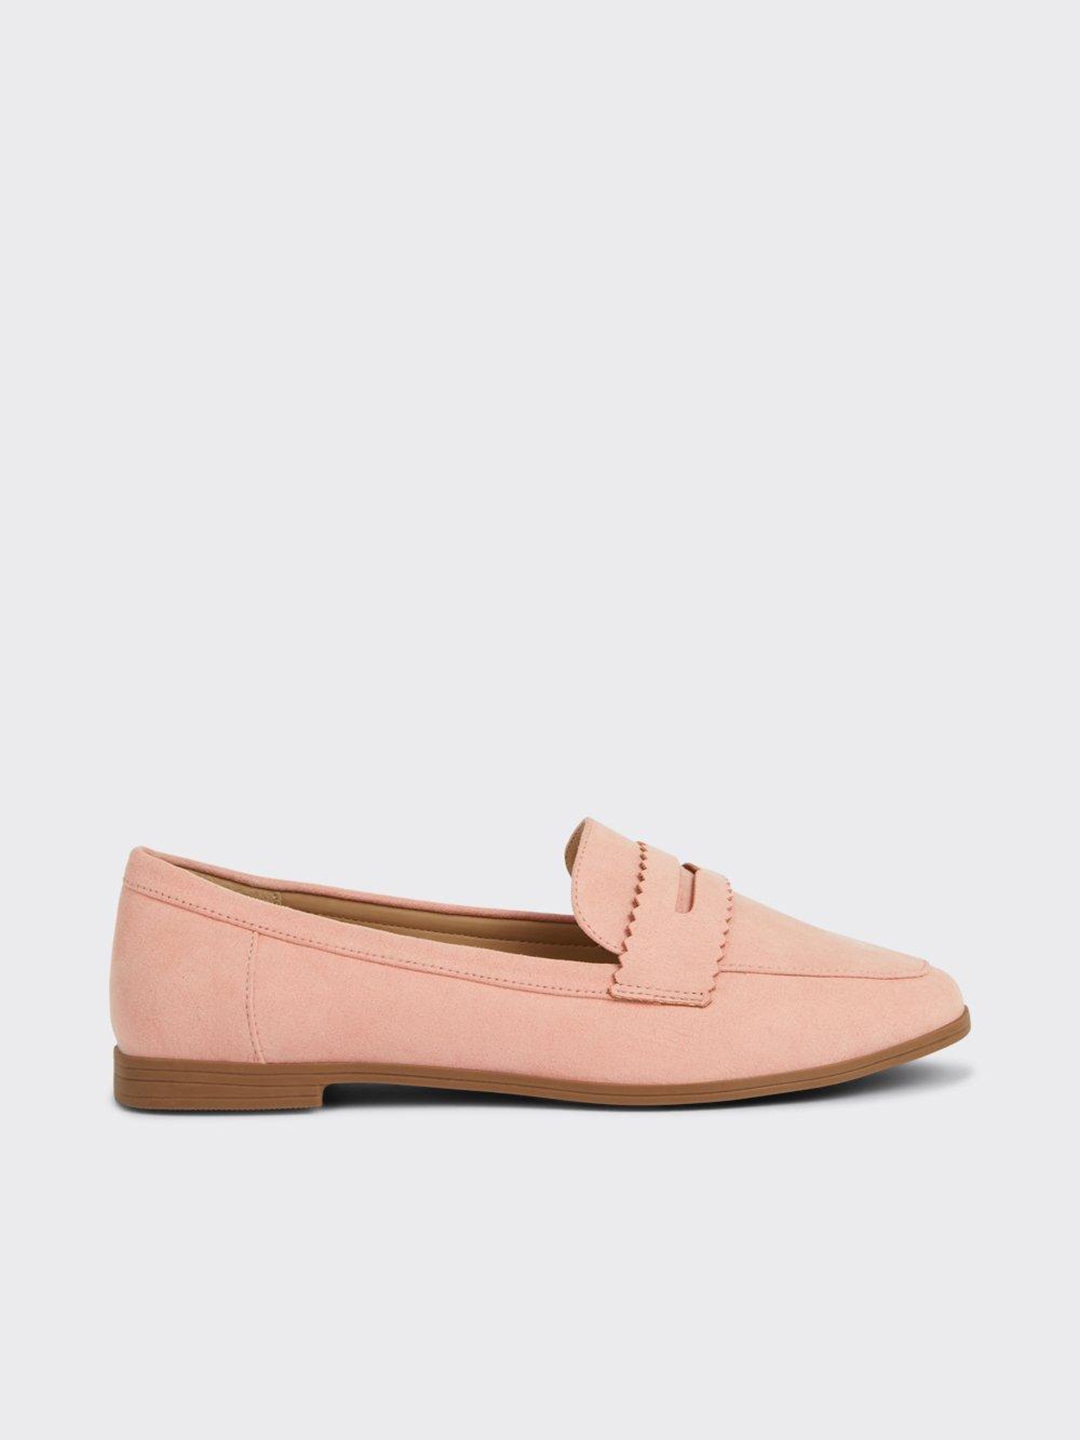 Buy DOROTHY PERKINS Women Pink Loafers - Casual Shoes for Women ...